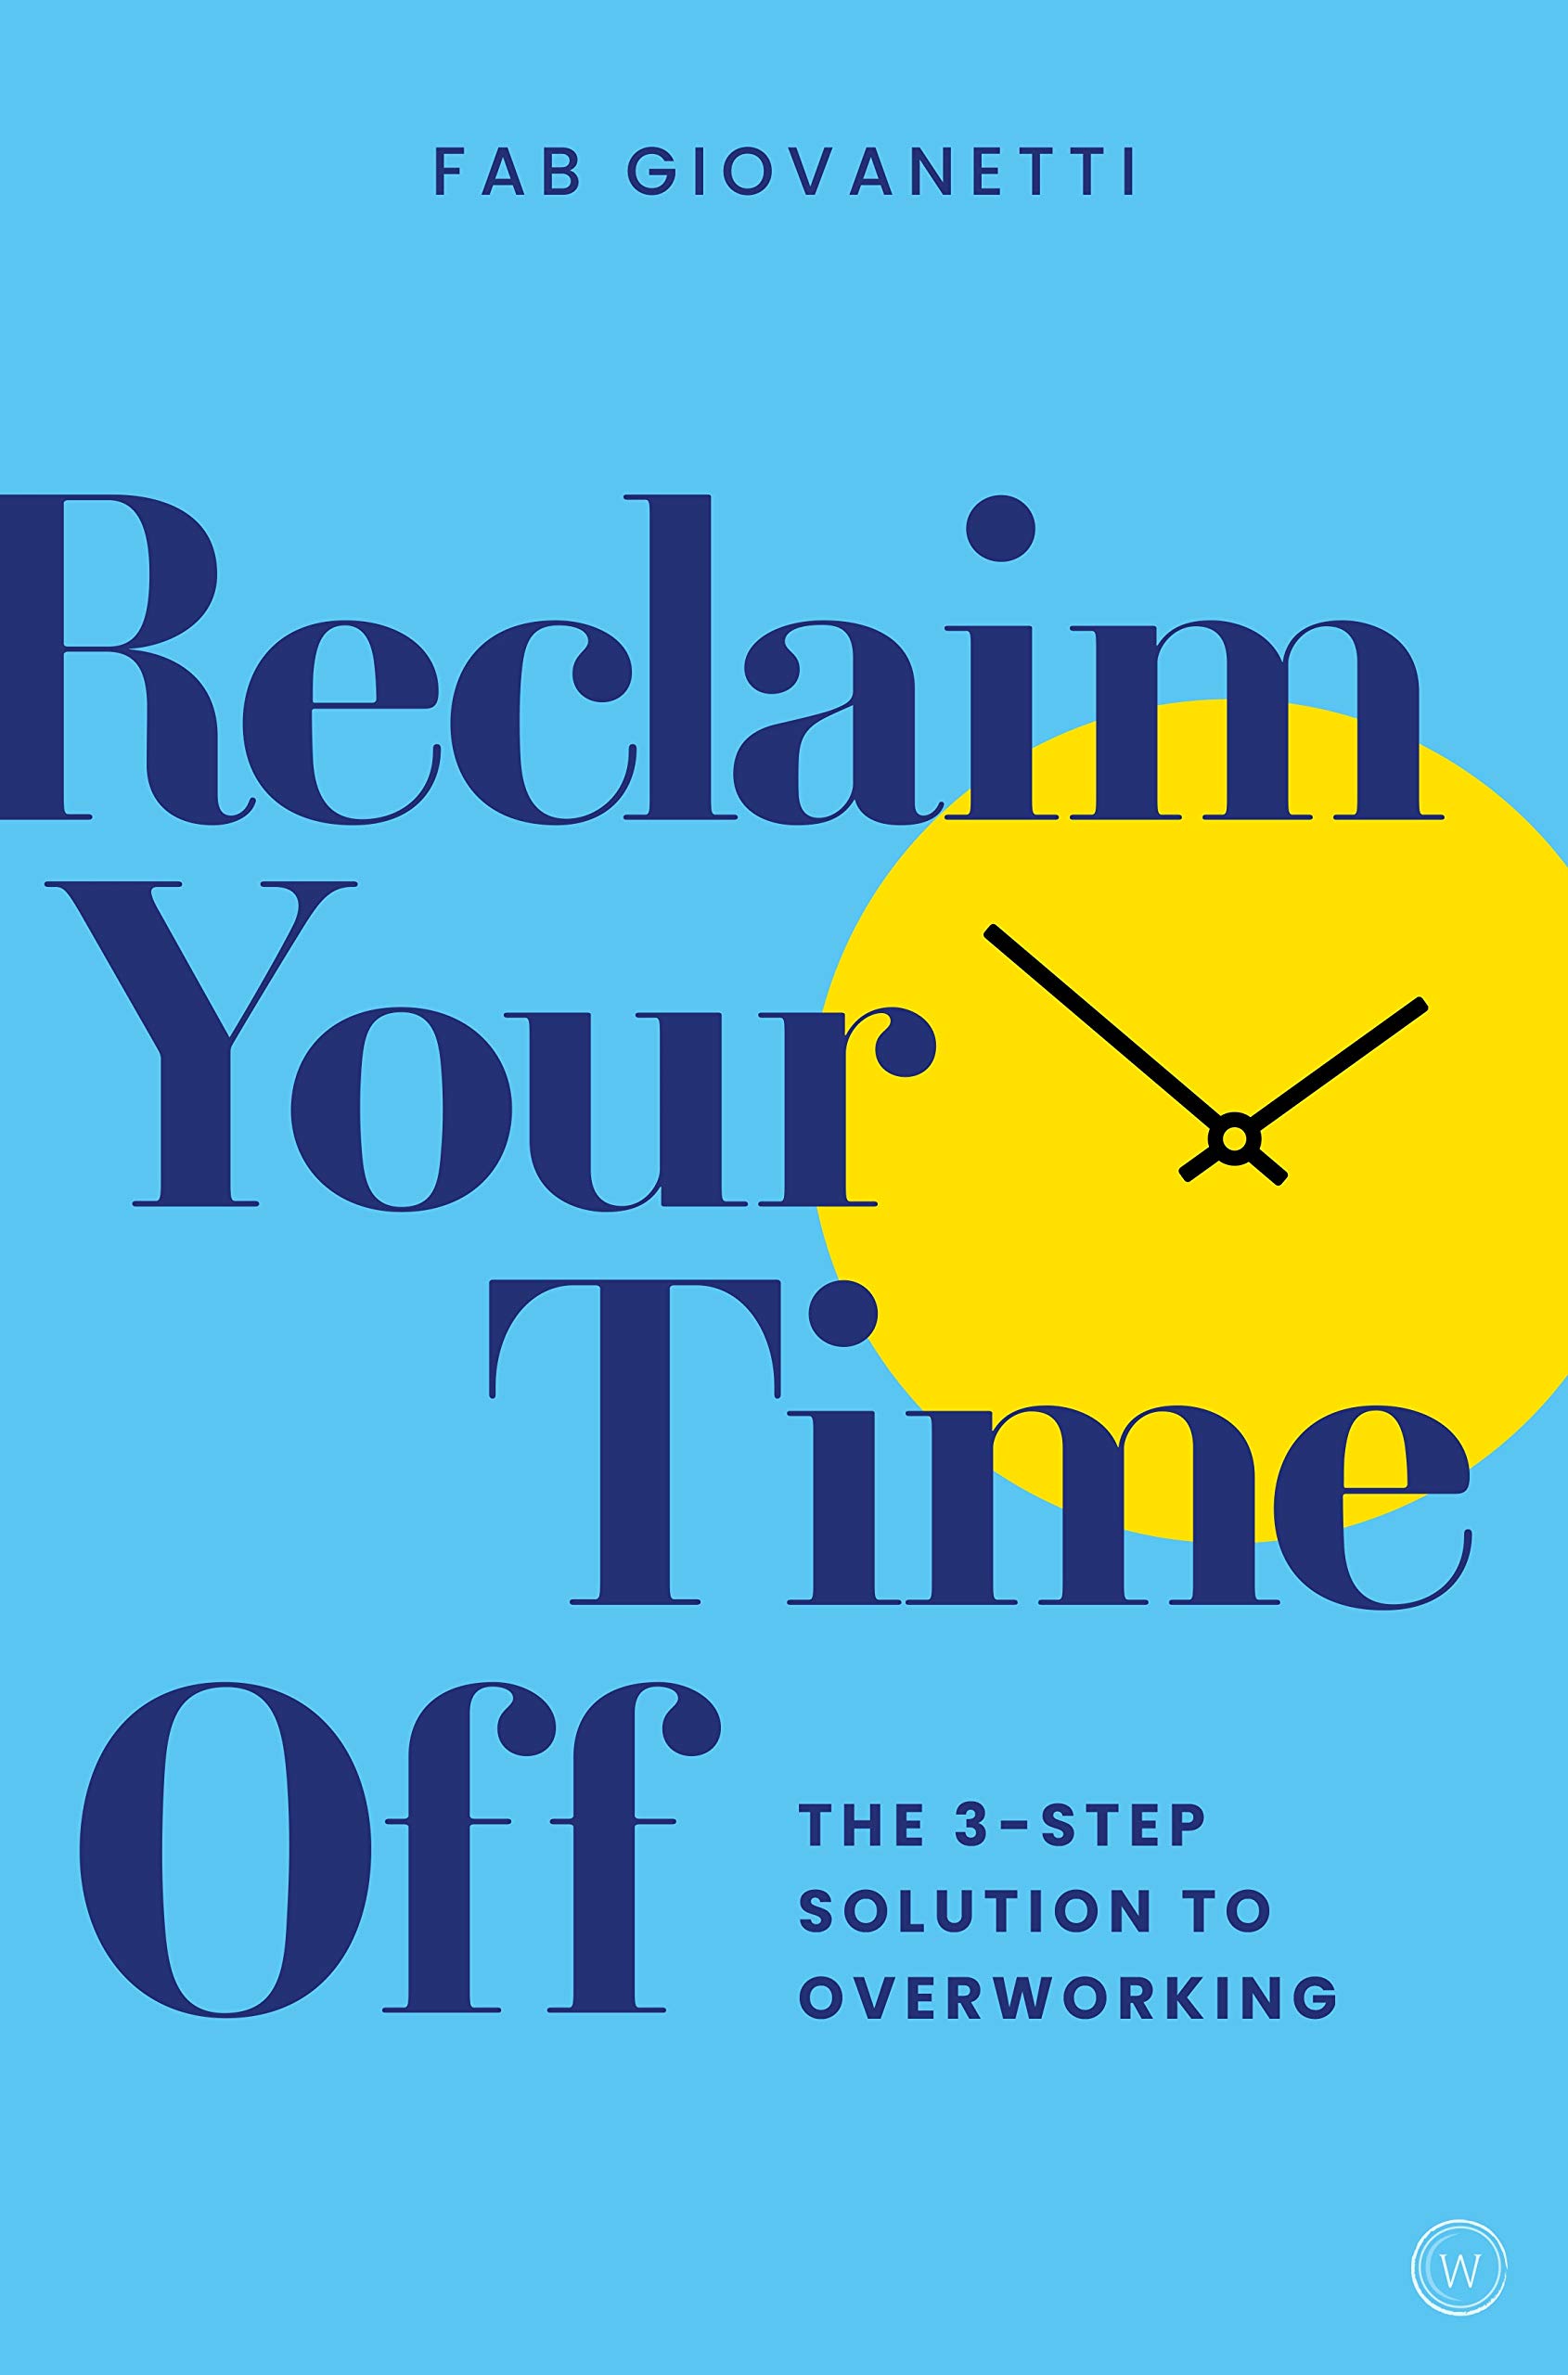 Reclaim Your Time Off | Fab Giovanetti